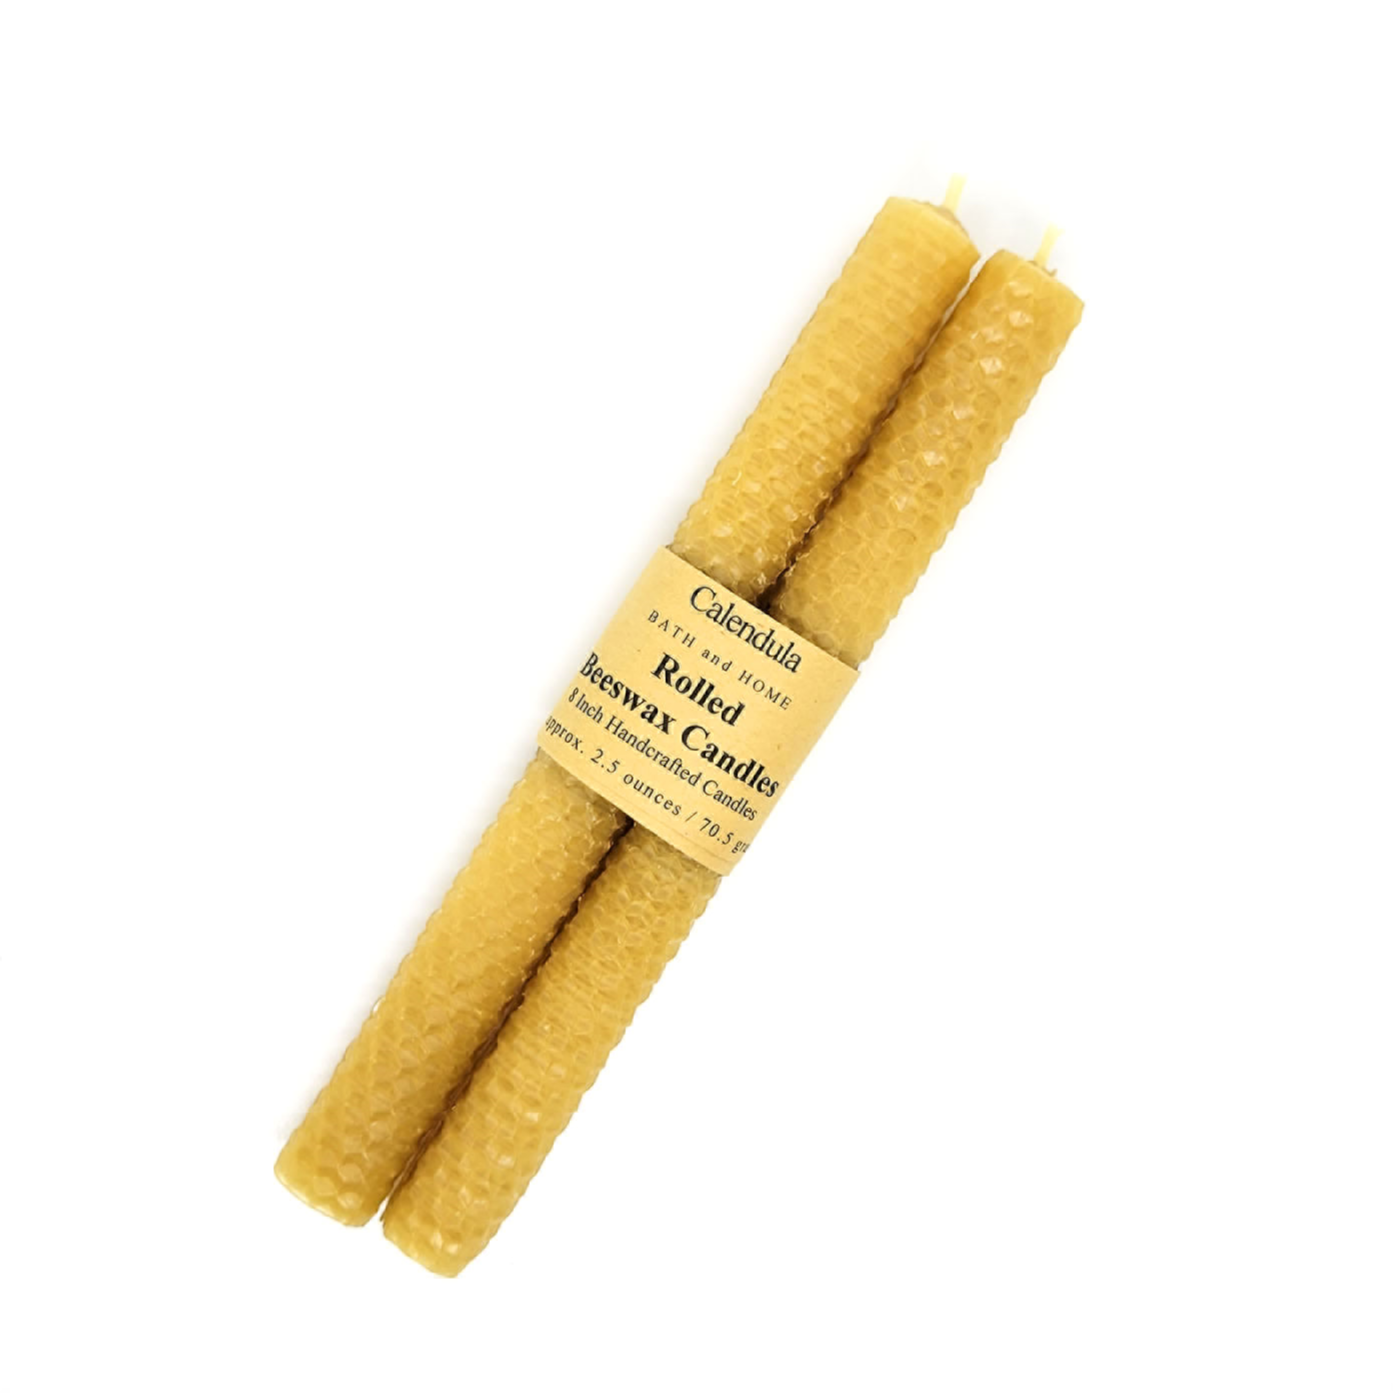 Rolled Beeswax Candle Set with Glass Holders - Calendula Bath and Home